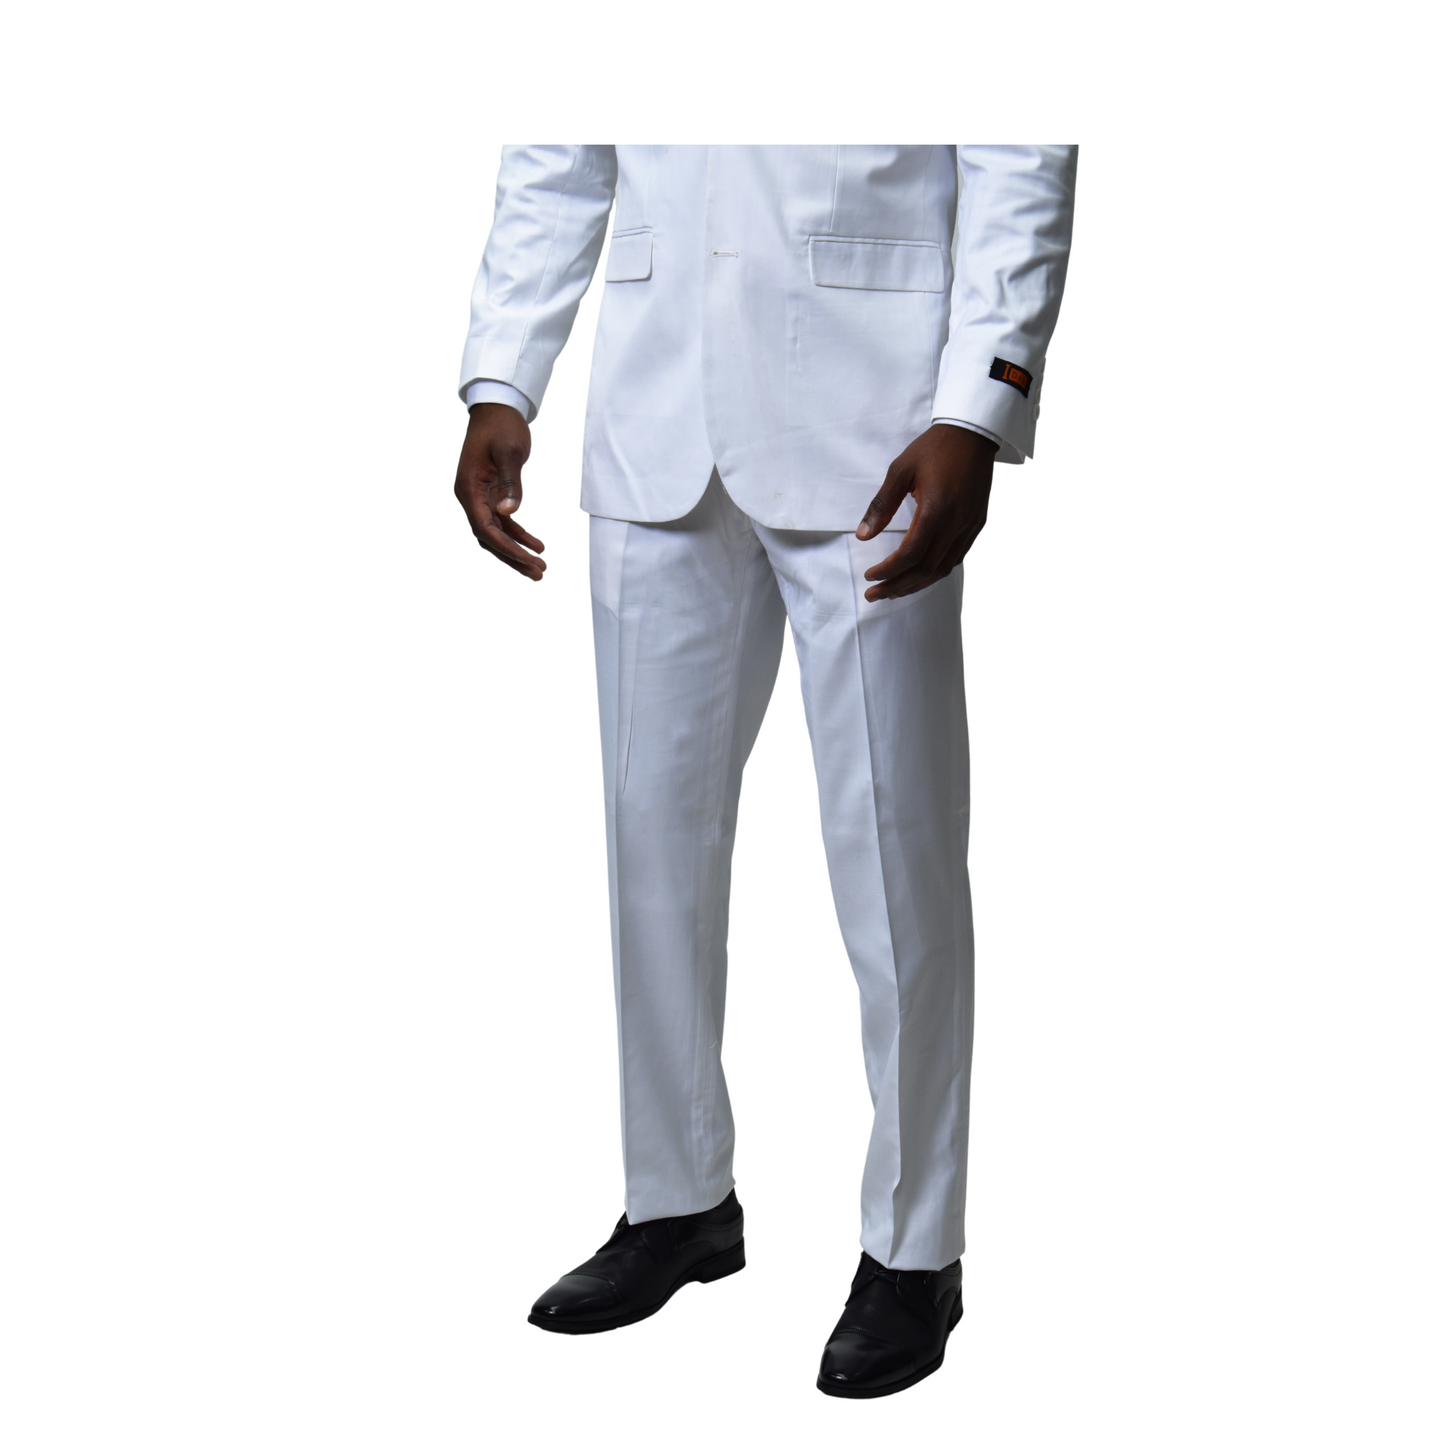 BUY ONE GET TWO FREE Ideal 3 Piece Suit - White